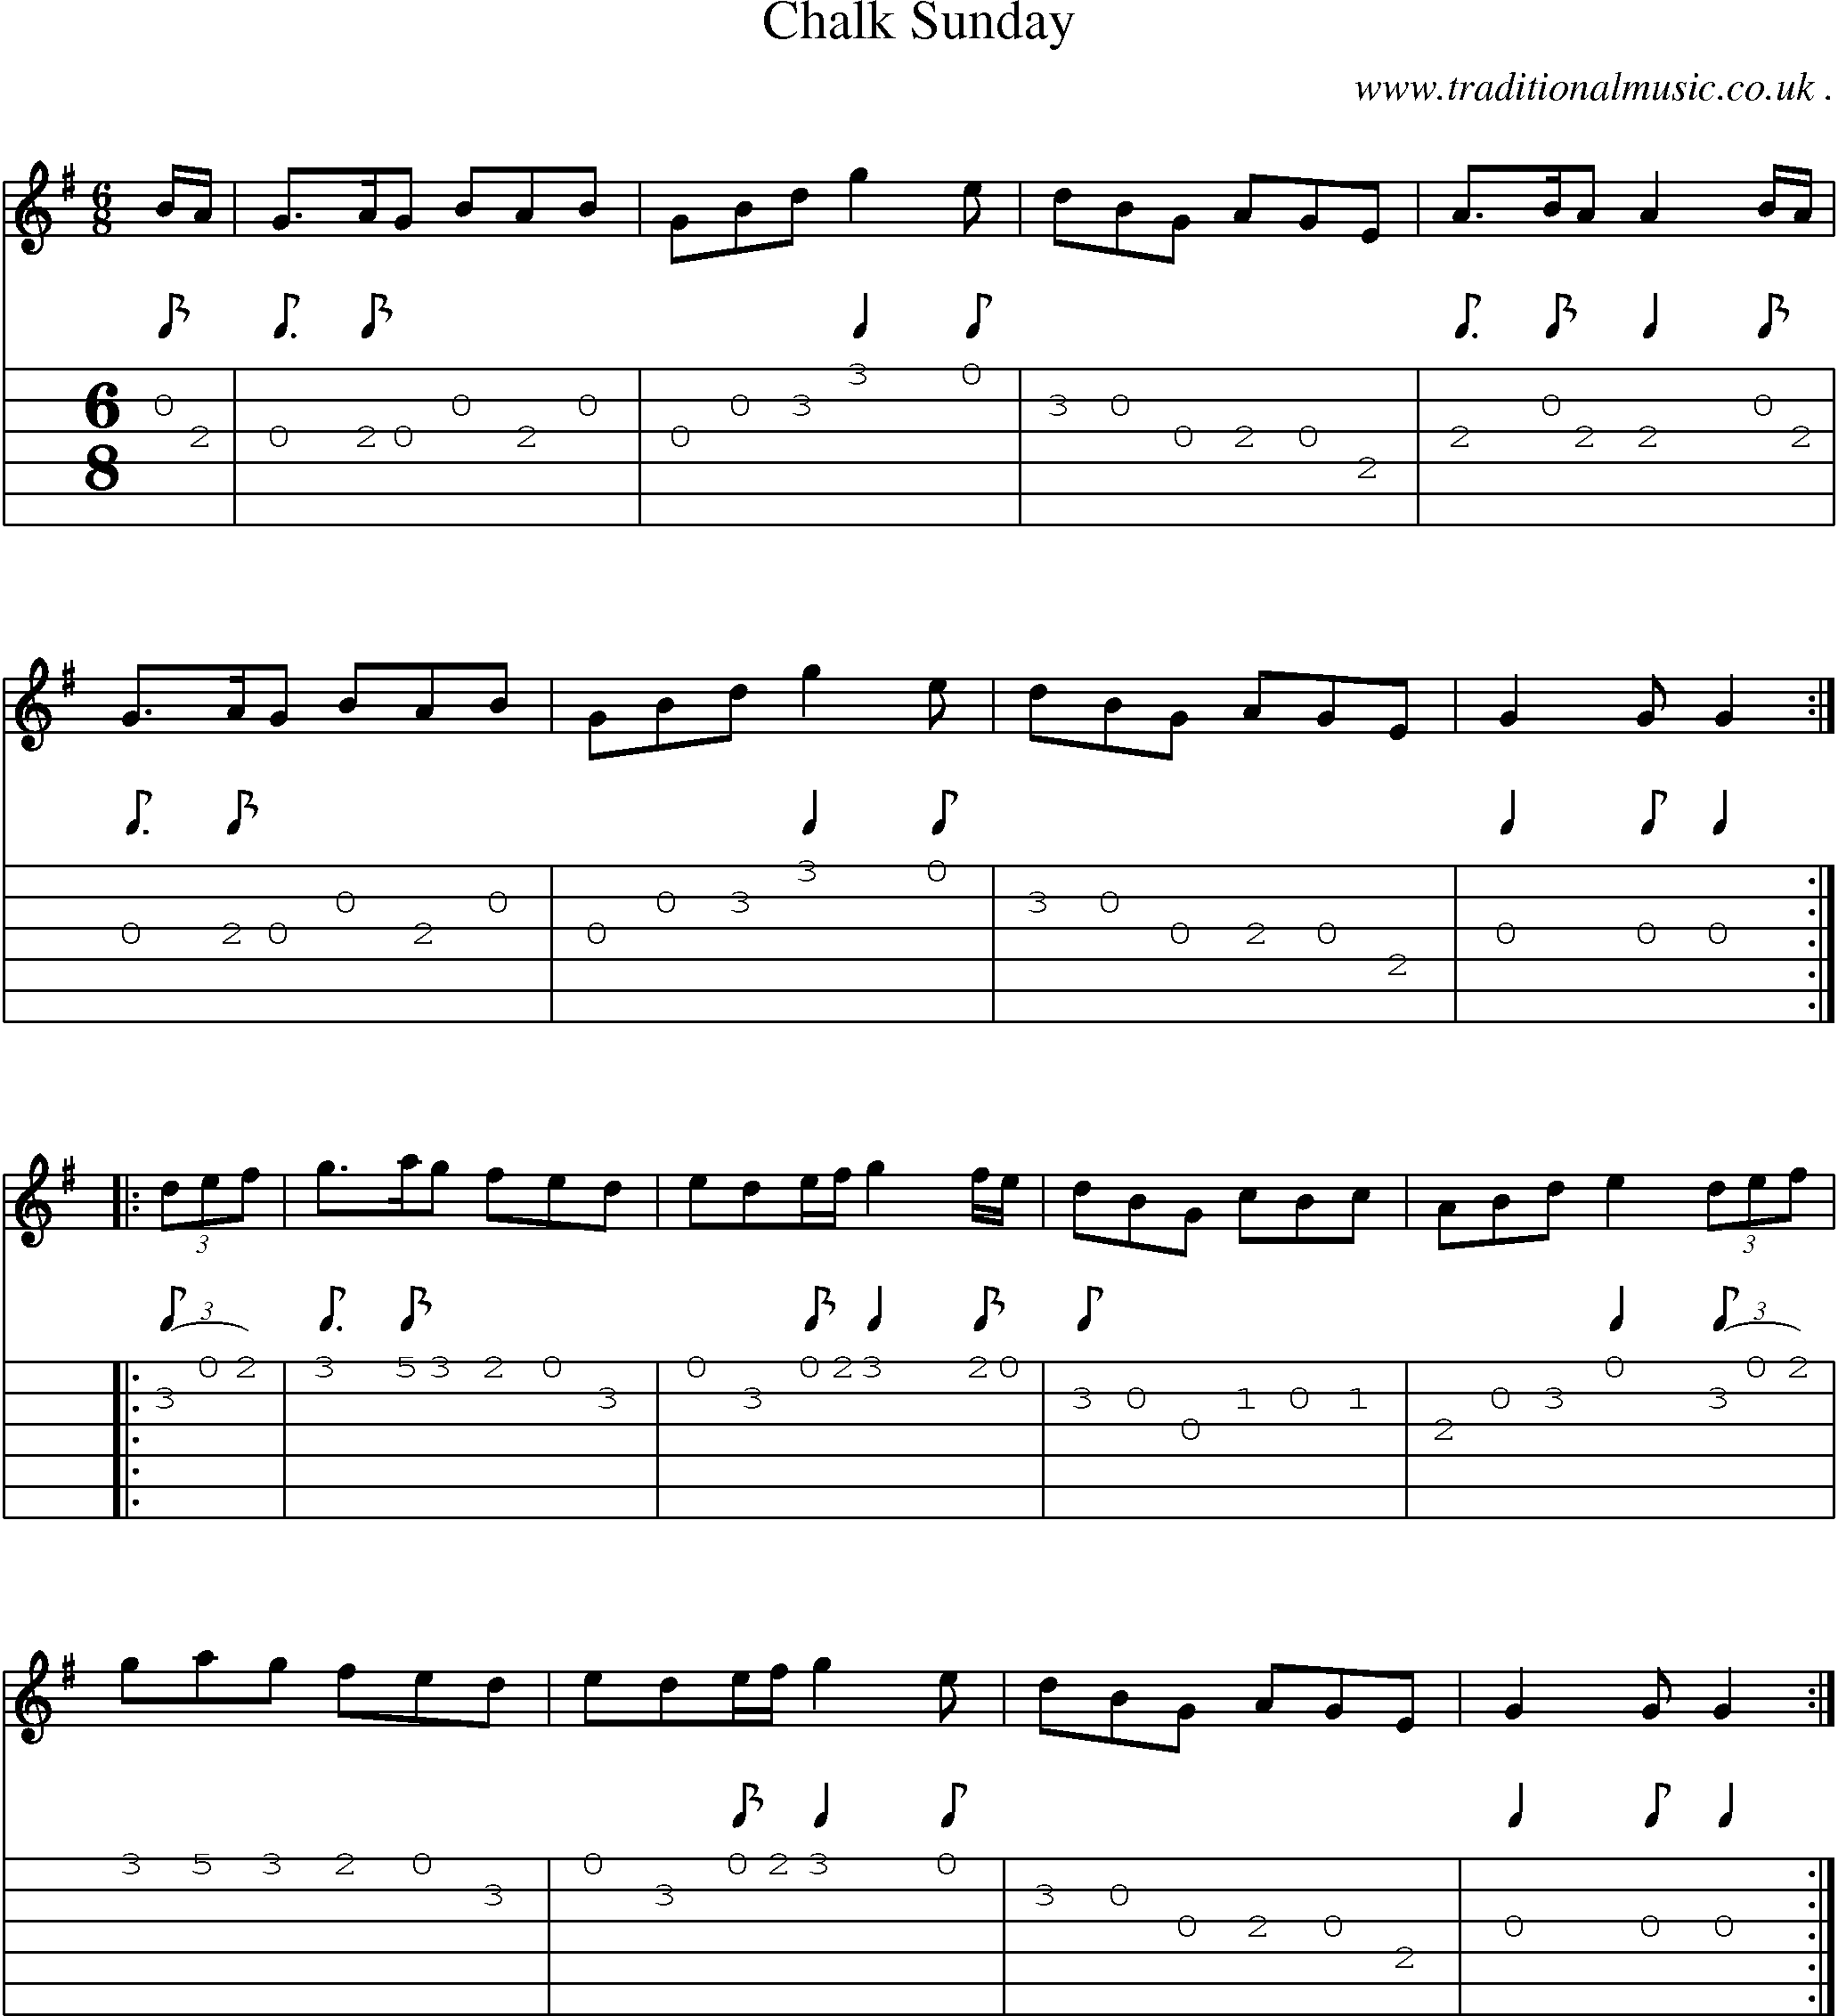 Sheet-Music and Guitar Tabs for Chalk Sunday